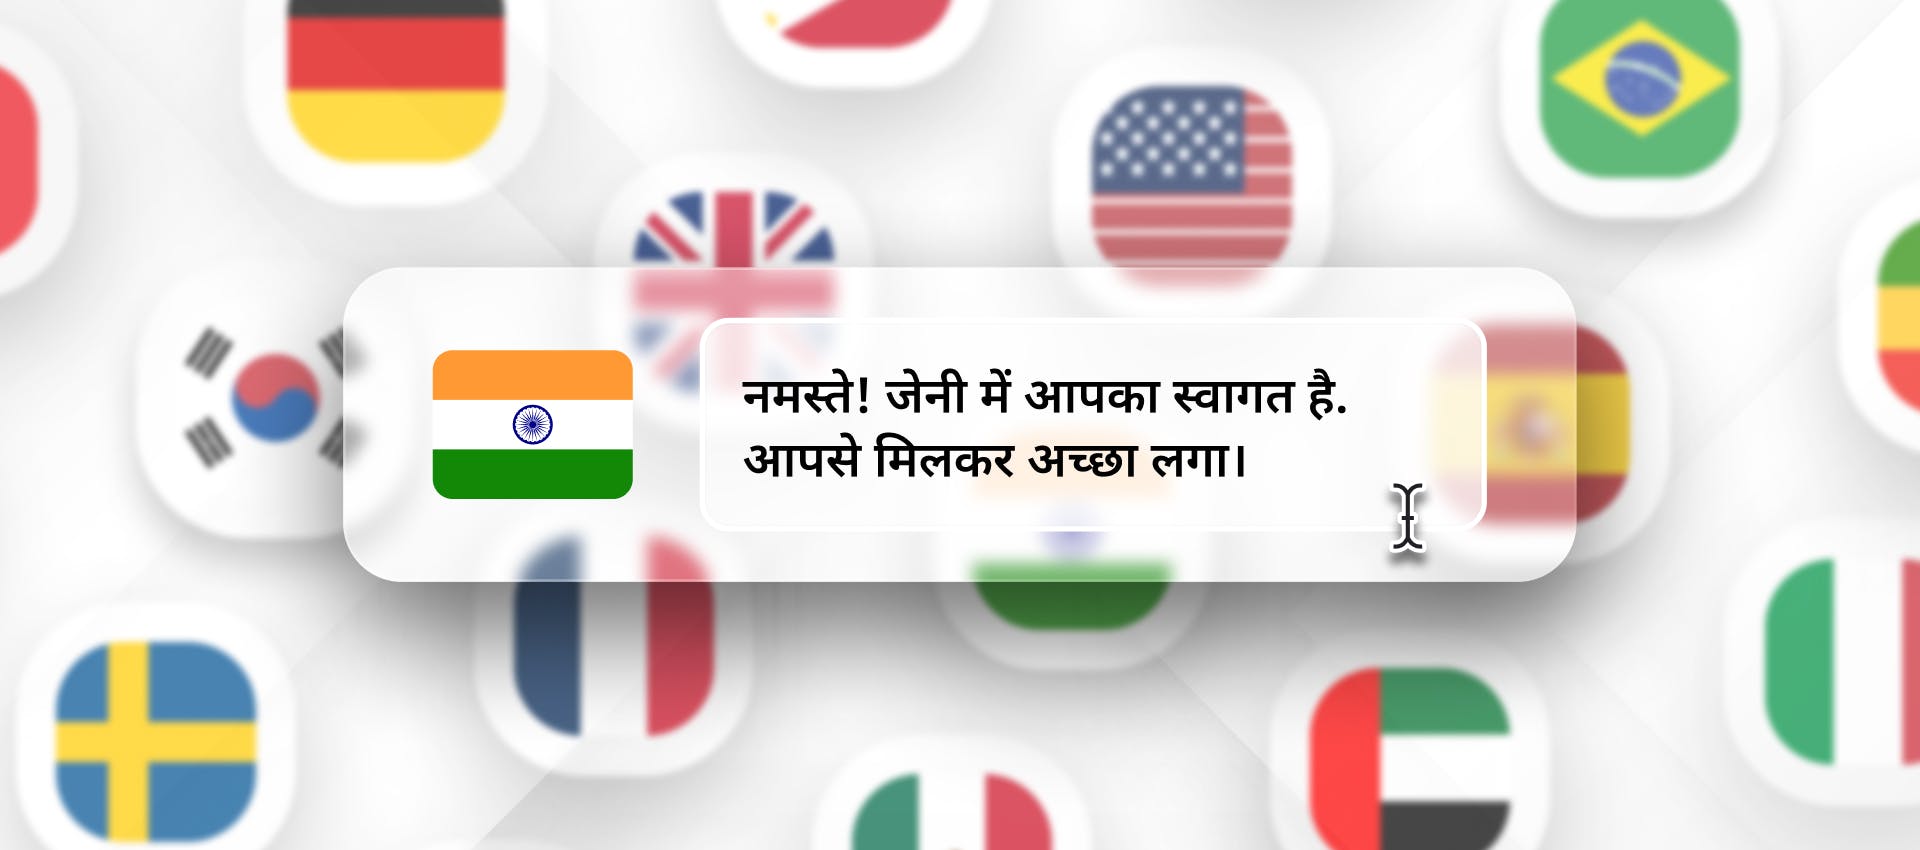 Hindi TTS phrase with different flags in the background